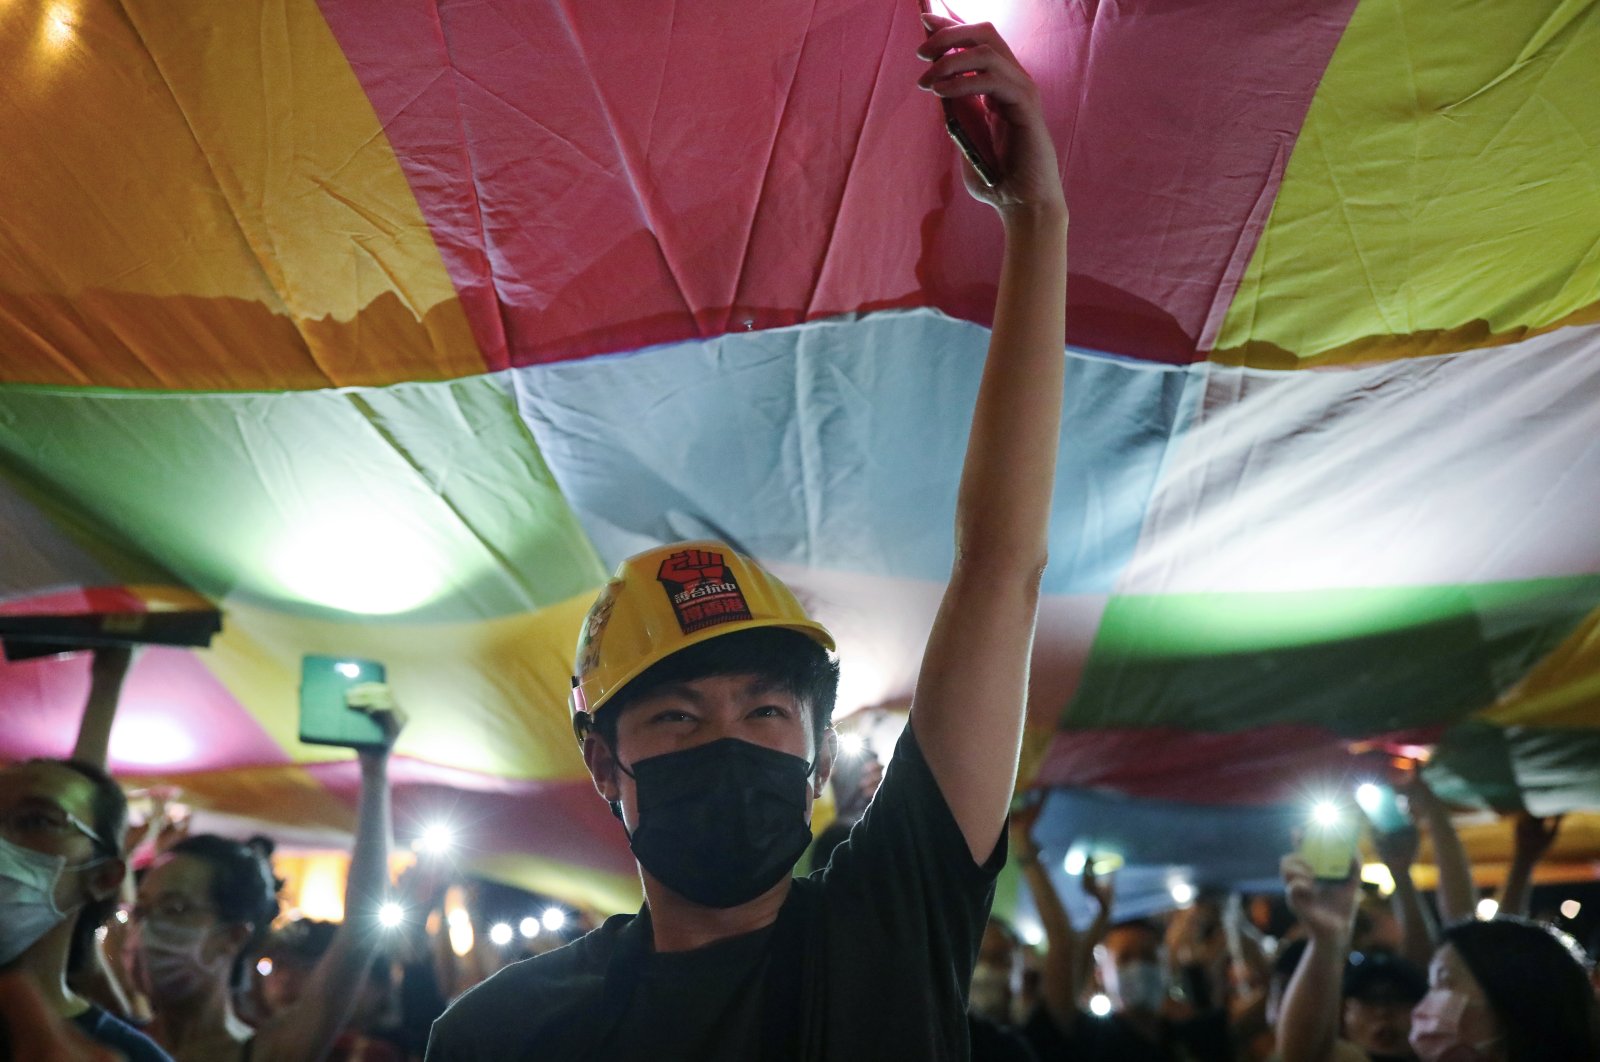 Supporters of the Hong Kong anti-government movement gather at Liberty Square in Taipei, Taiwan, June 13, 2020. (Reuters Photo)